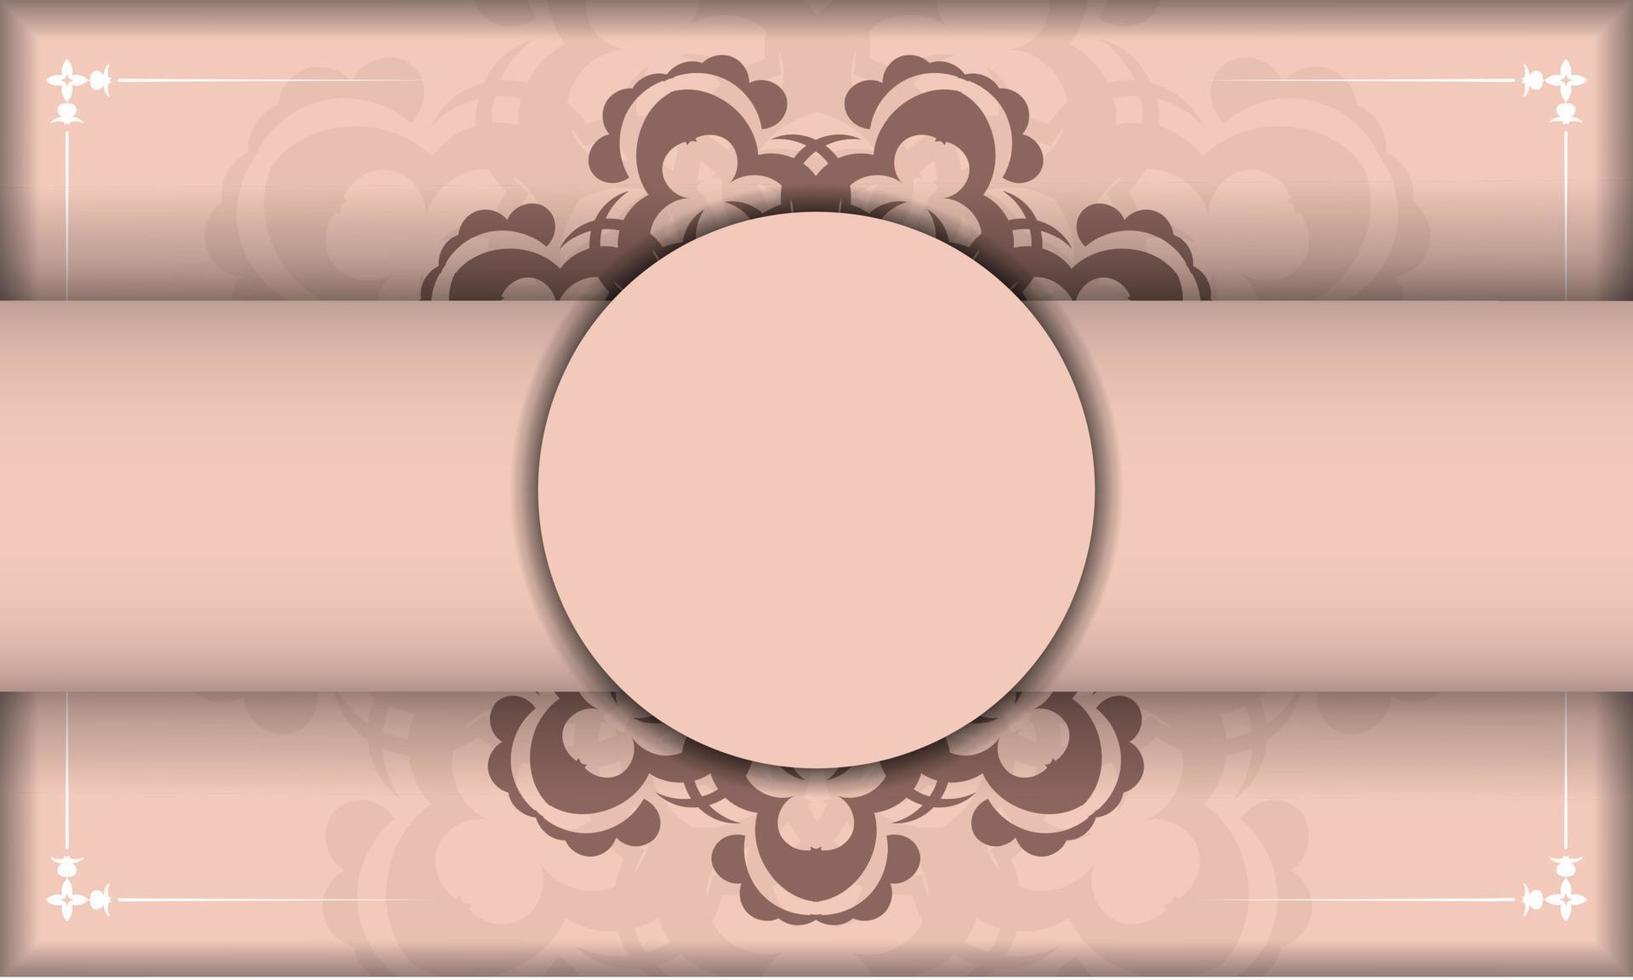 Leaflet in pink with mandala pattern prepared for typography. vector